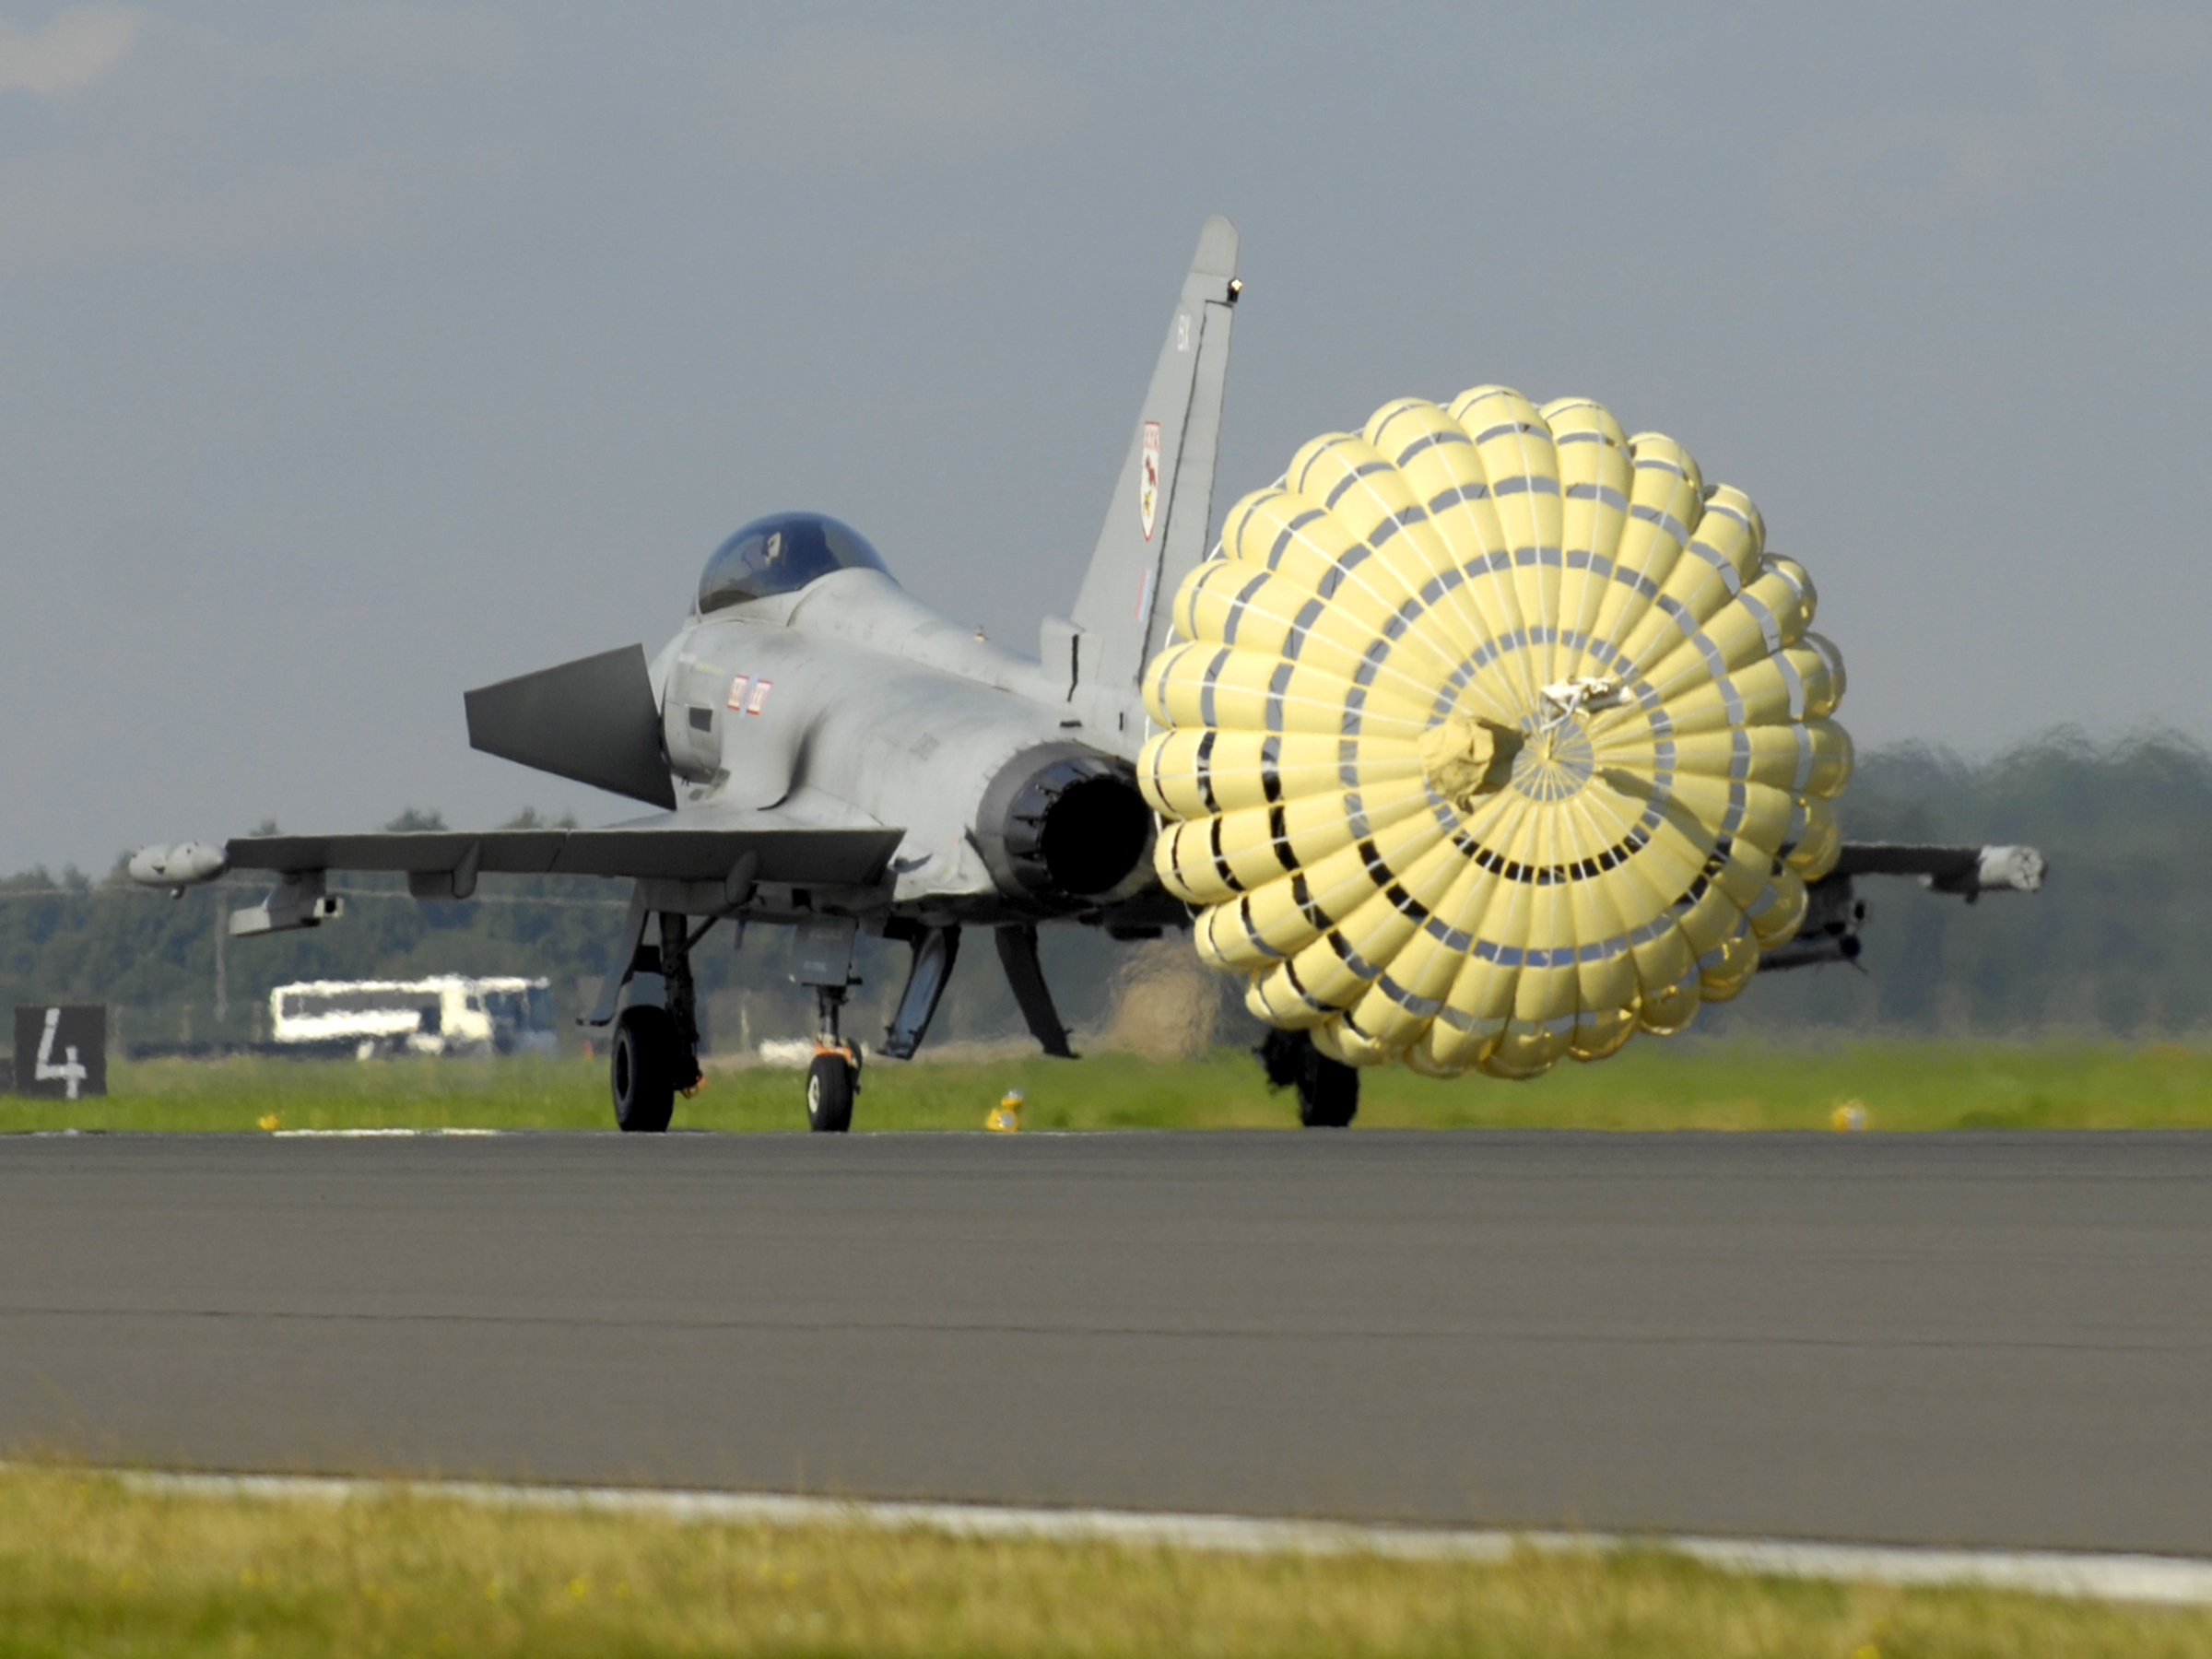 A_Typhoon_F2_fighter_jet_deploys_a_brake_parachute_as_it_lands_at_RAF_Coningsby_MOD_45147966.jpg